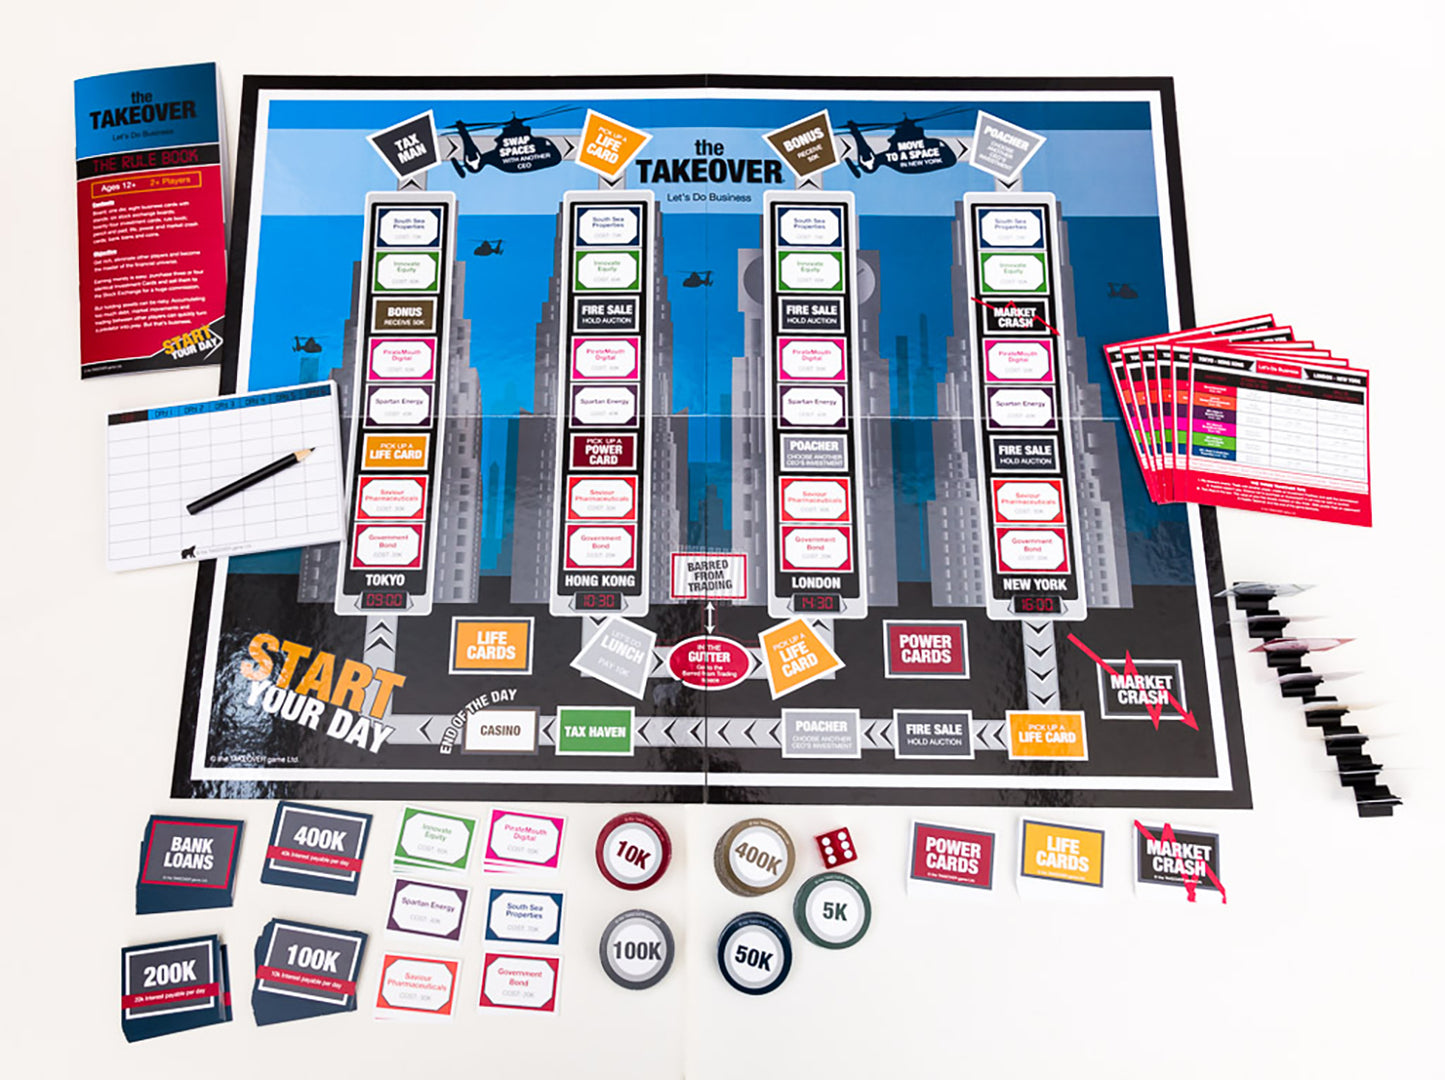 The Takeover Board Game